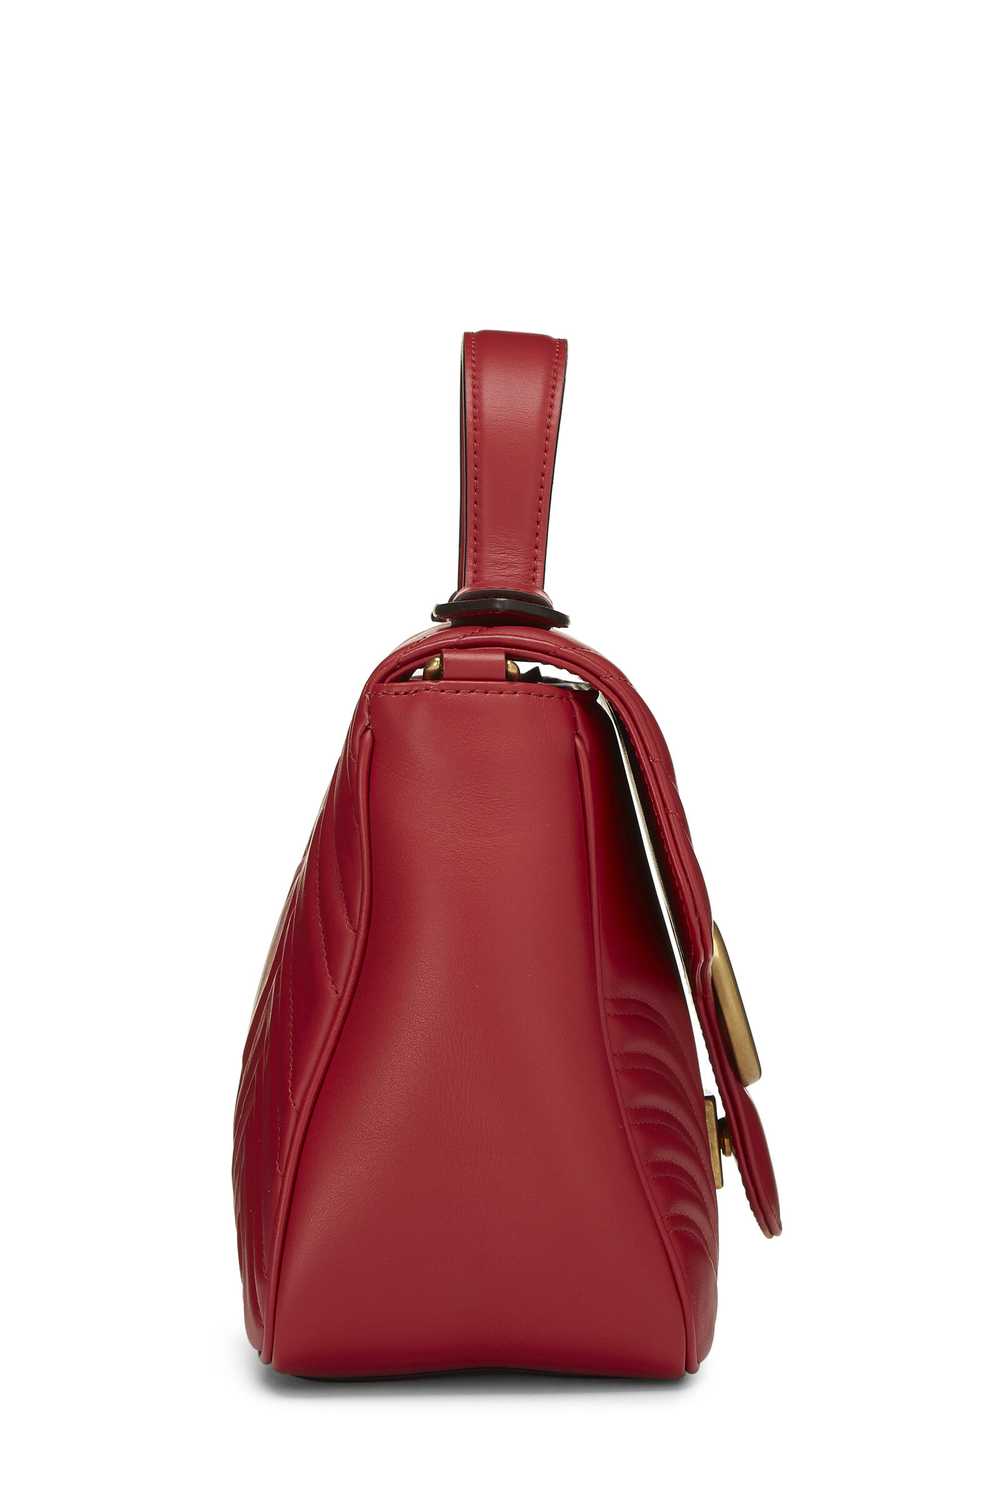 Red Leather GG Marmont Top Handle Bag Small - image 3